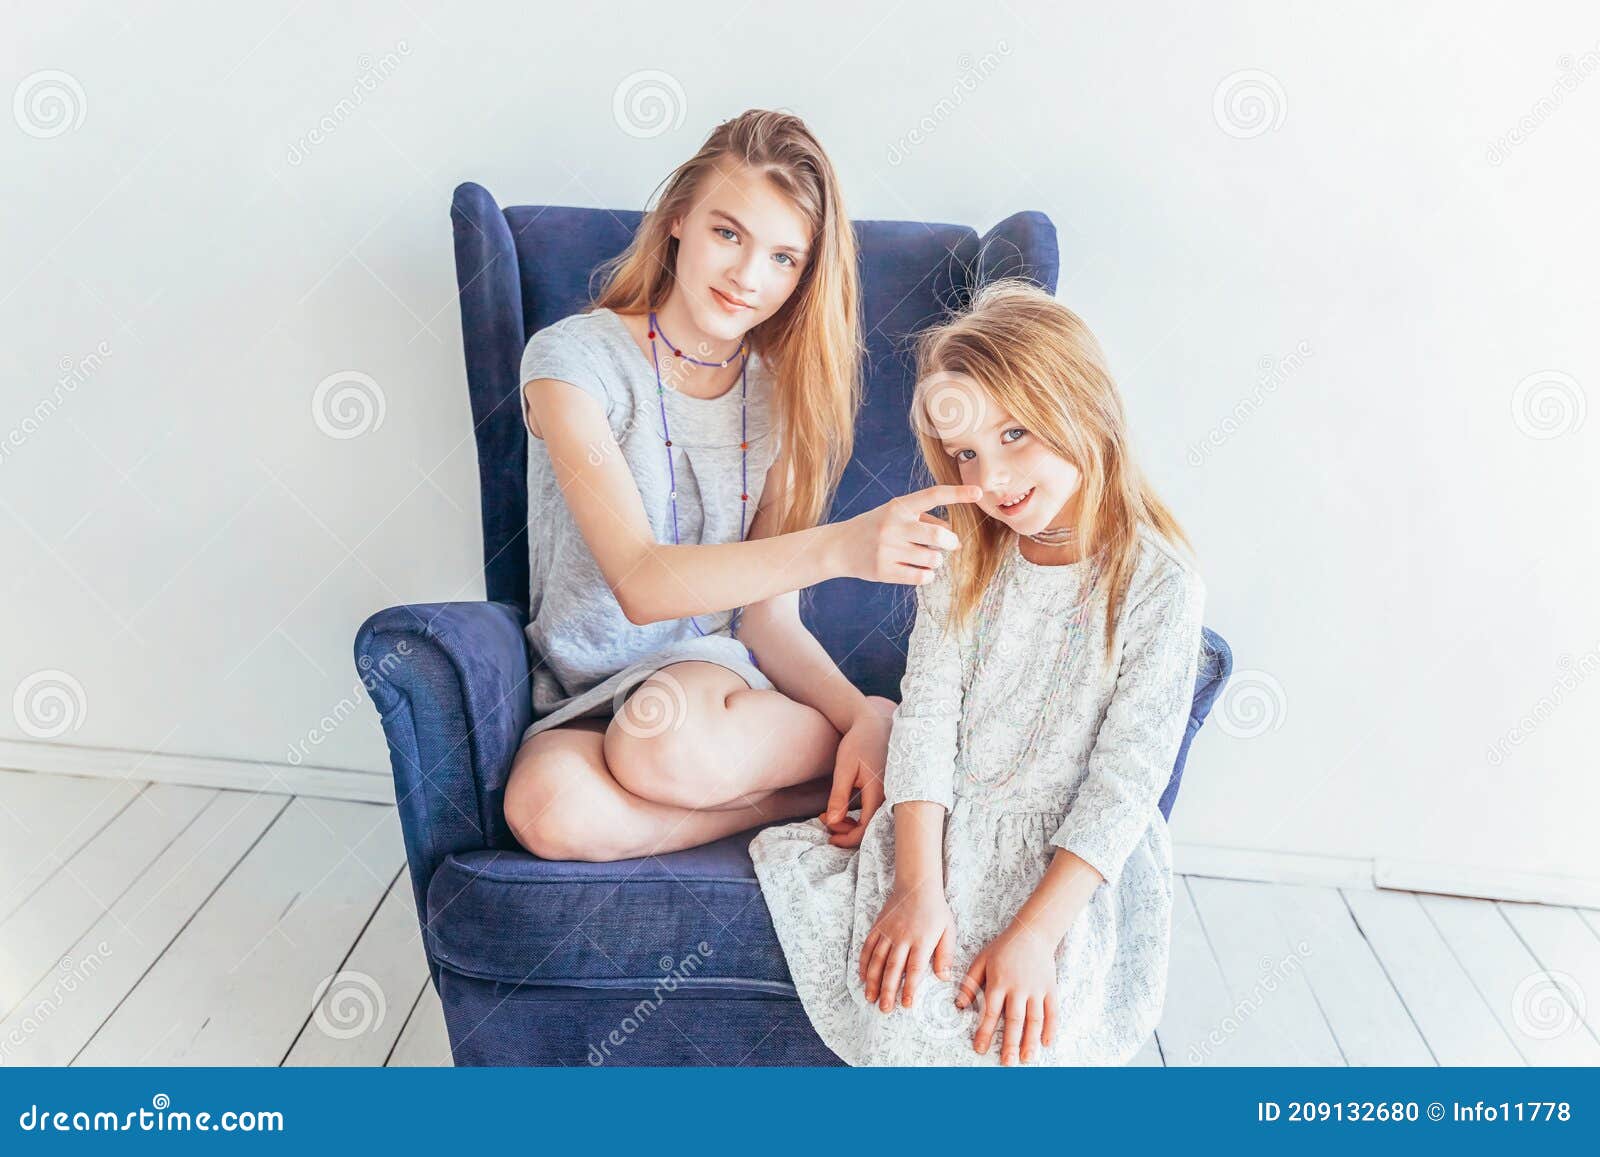 Two Happy Kids Sitting on Cozy Blue Chair Relaxing Playing in White ...